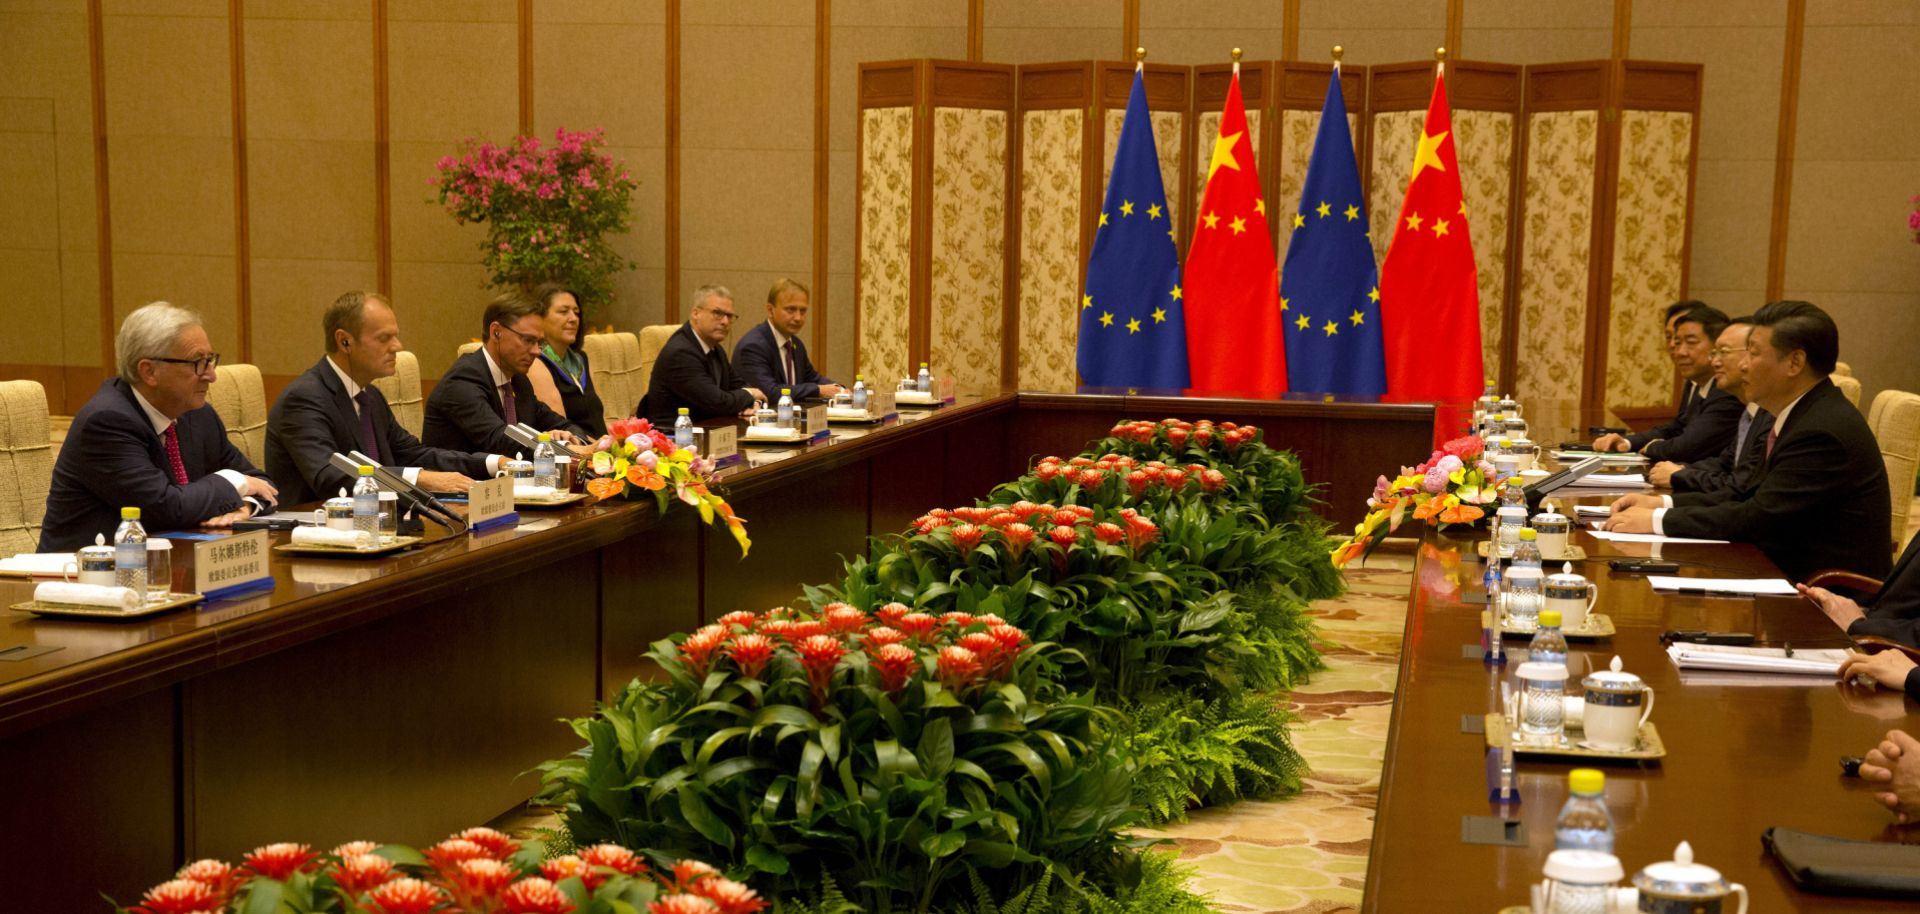 Chinese President Xi Jinping, right, meets with European Commission President Jean-Claude Juncker, left, and European Council President Donald Tusk, second from left, in Beijing on July 16, 2018.